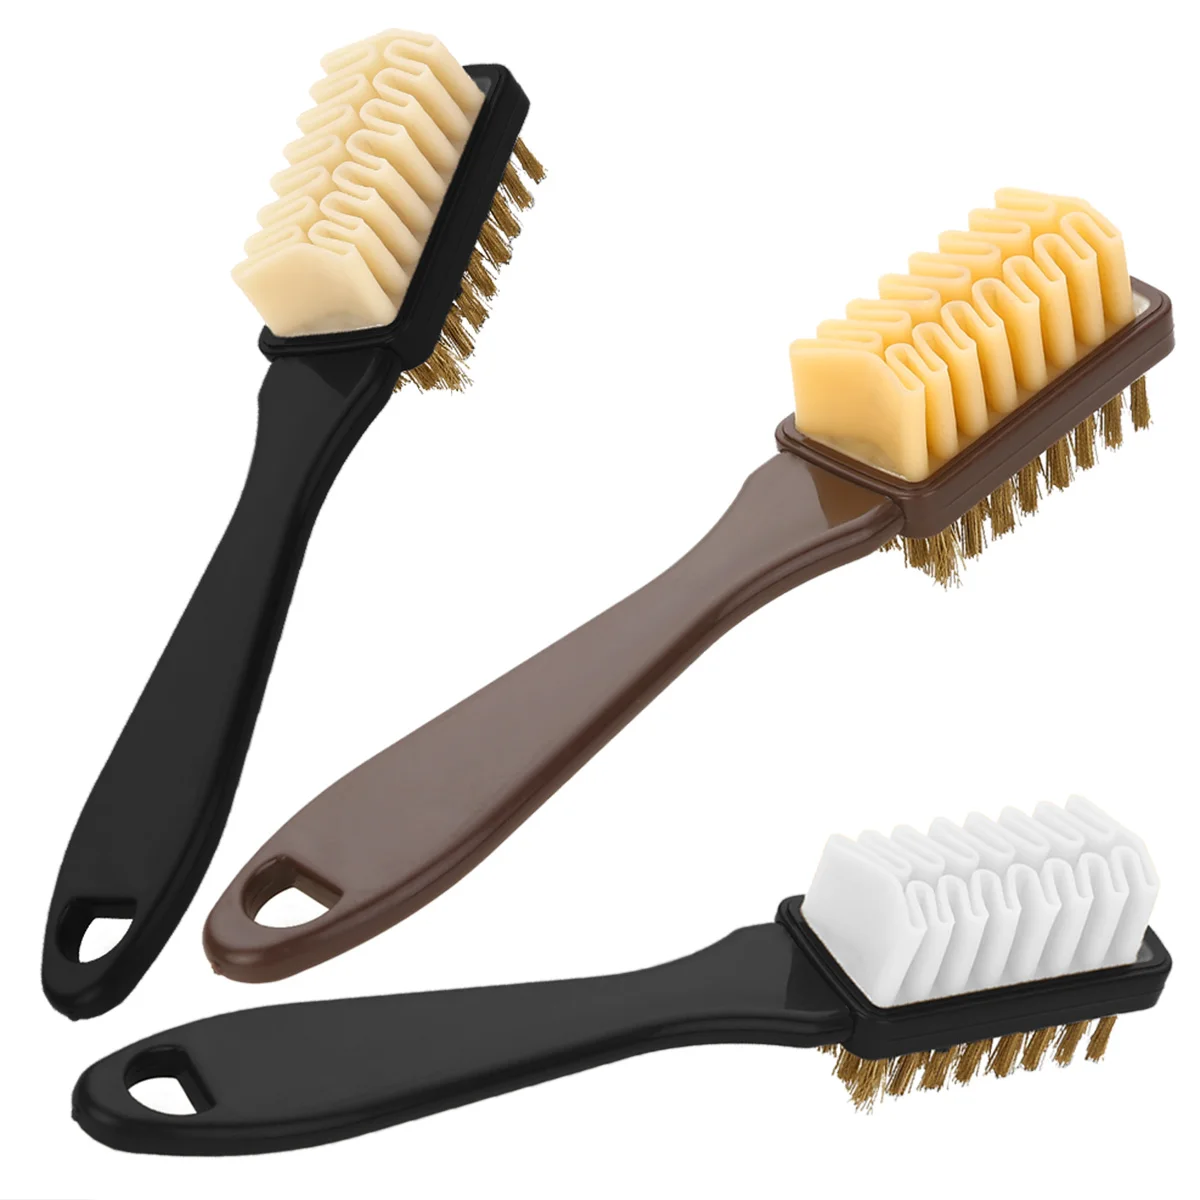 2-Sided Cleaning Brush Rubber Eraser Set Fit for Suede Nubuck Shoes Steel + plastic + rubber Boot Cleaner